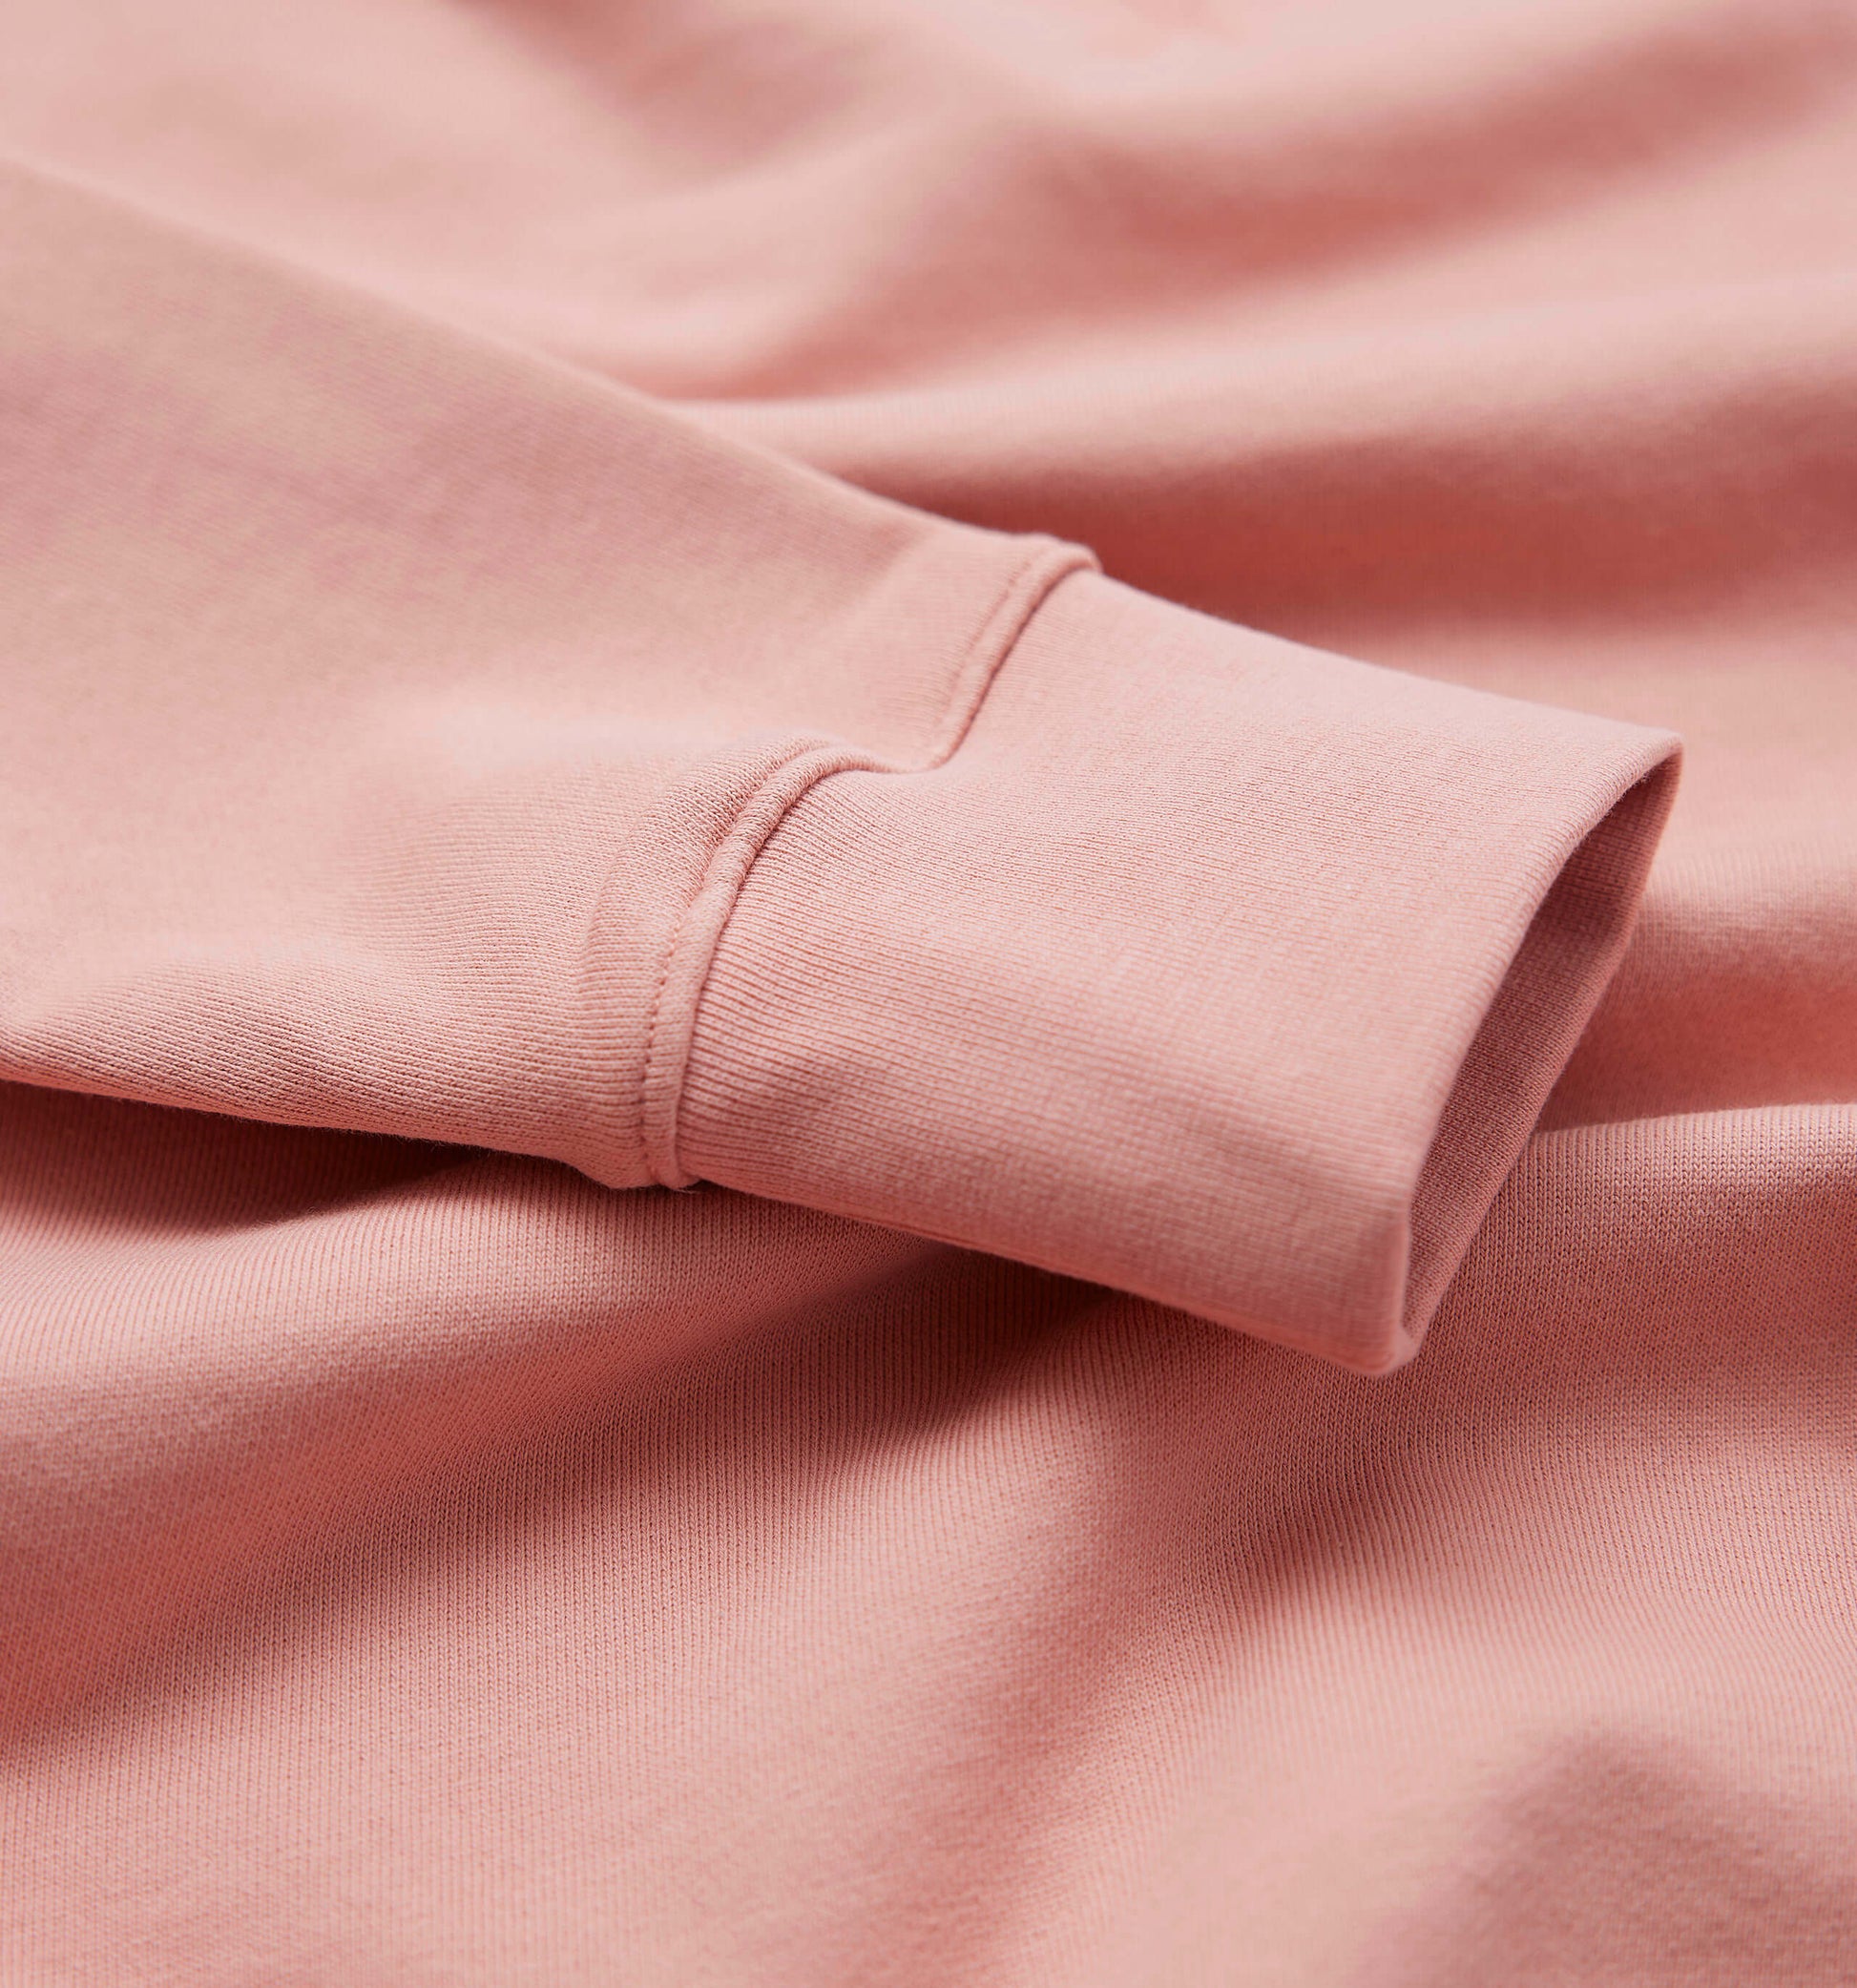 The George - French Terry Cotton Sweatshirt  In Dark Pink From King Essentials